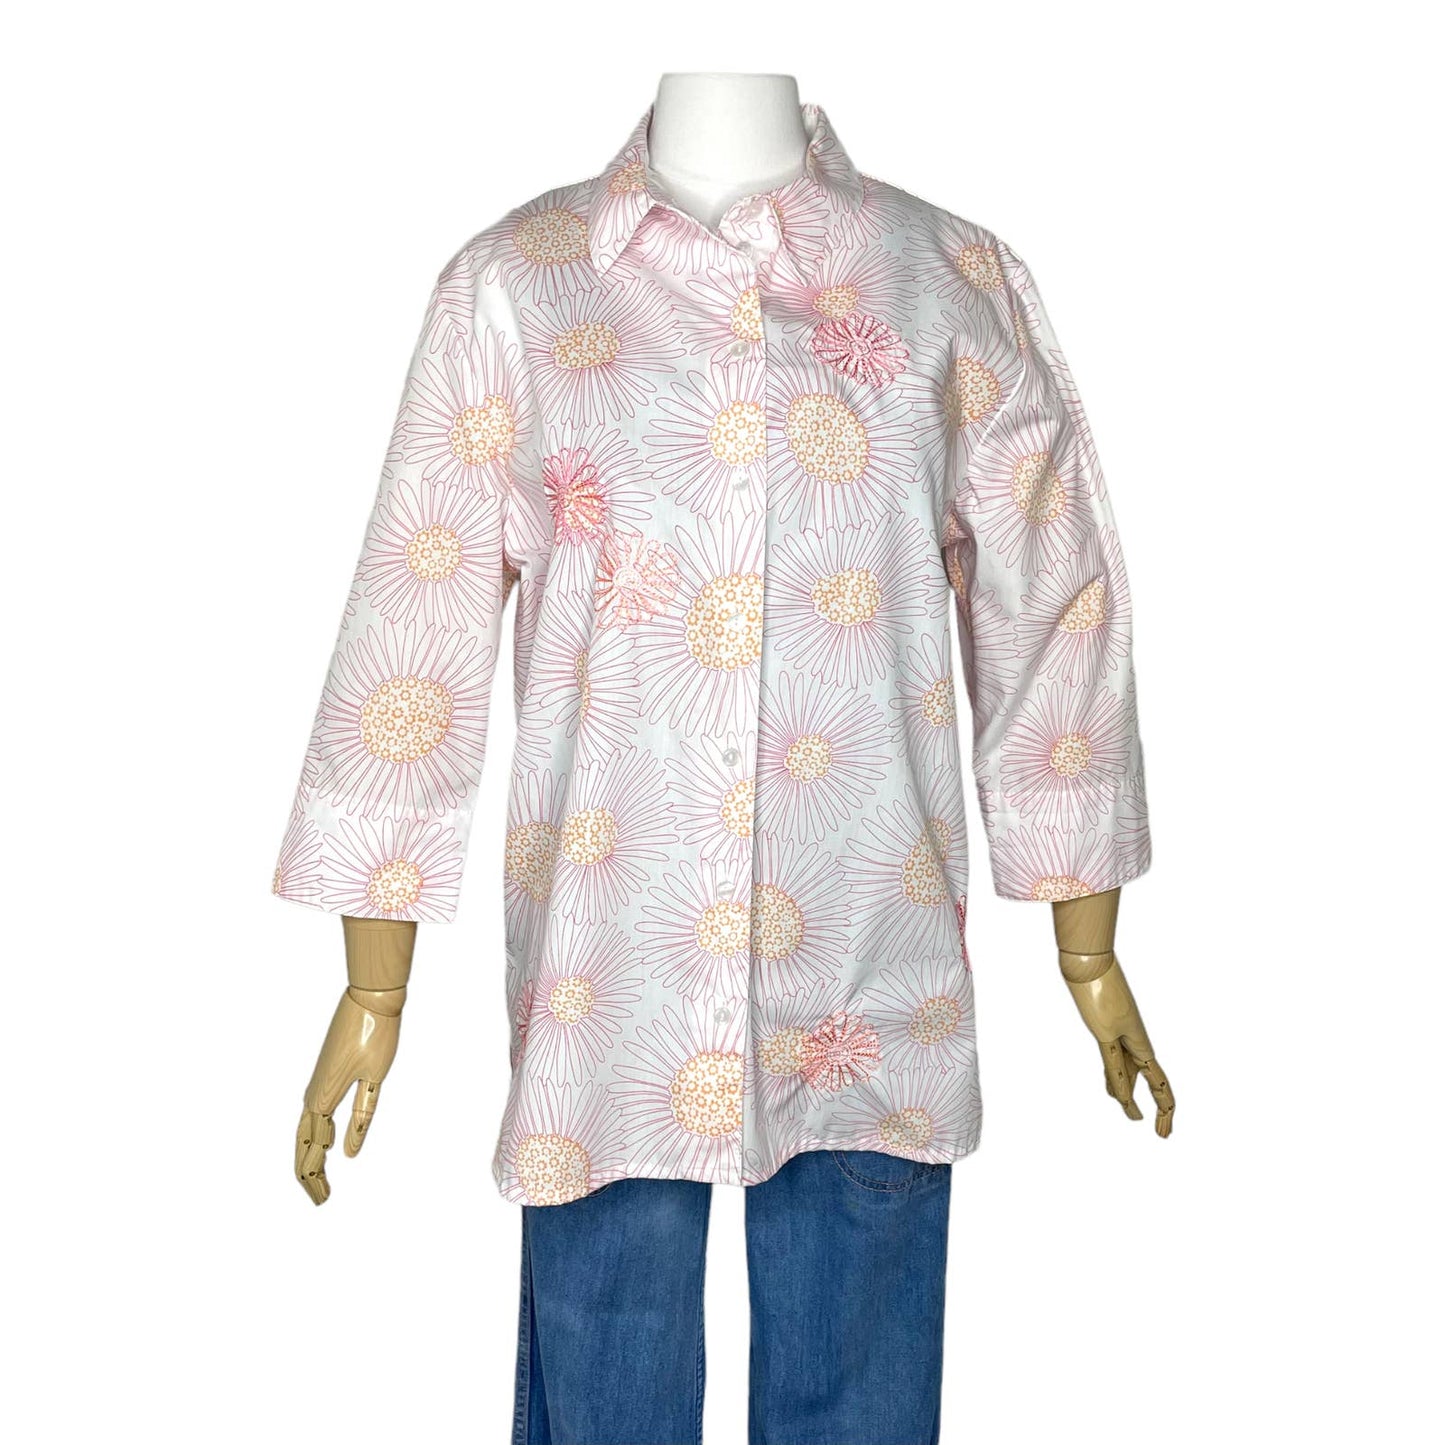 90's y2k floral bright neon daisy embroidered cotton button-up shirt / Medium Large XL